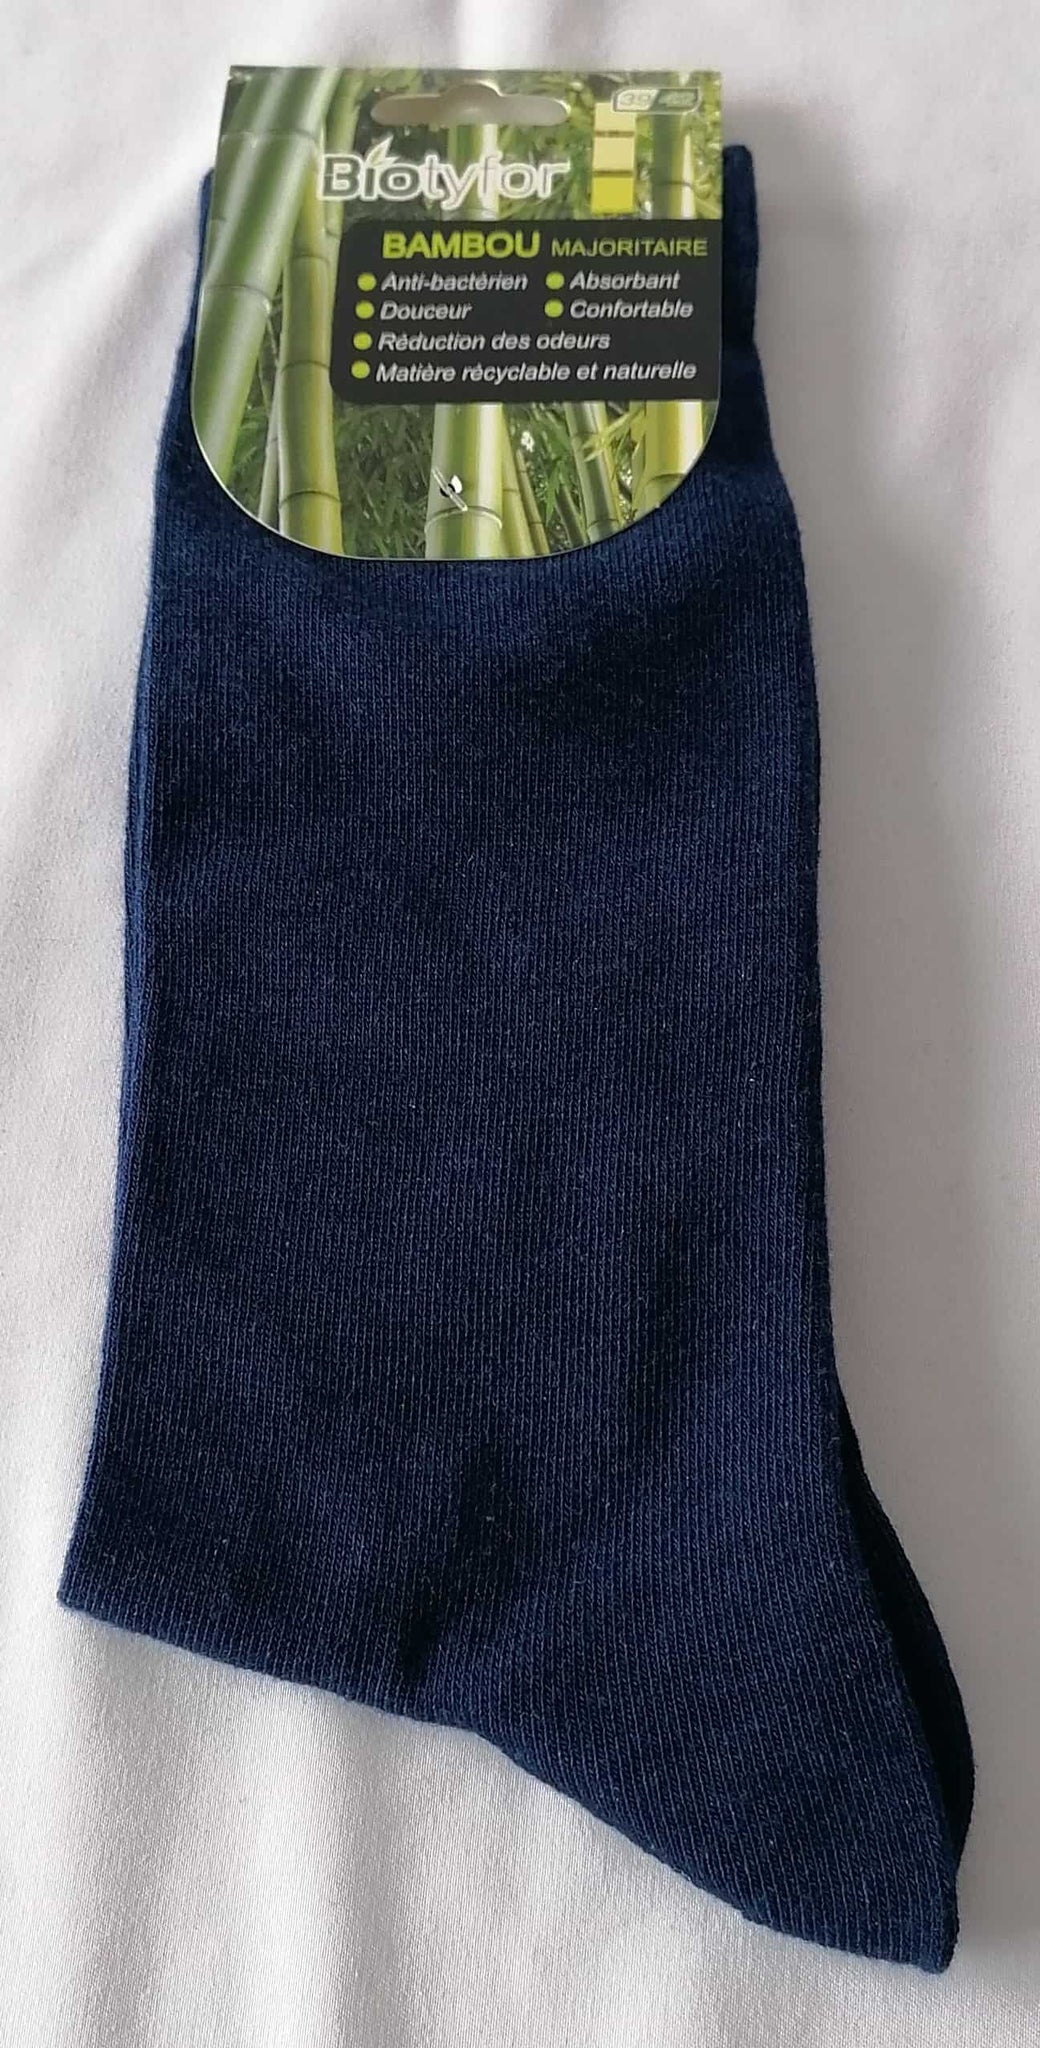 LOT OF 1 TO 6 PAIRS OF BAMBOO SOCKS - COMFORT ELASTIC - QUALITY - 39/42 - NAVY BLUE